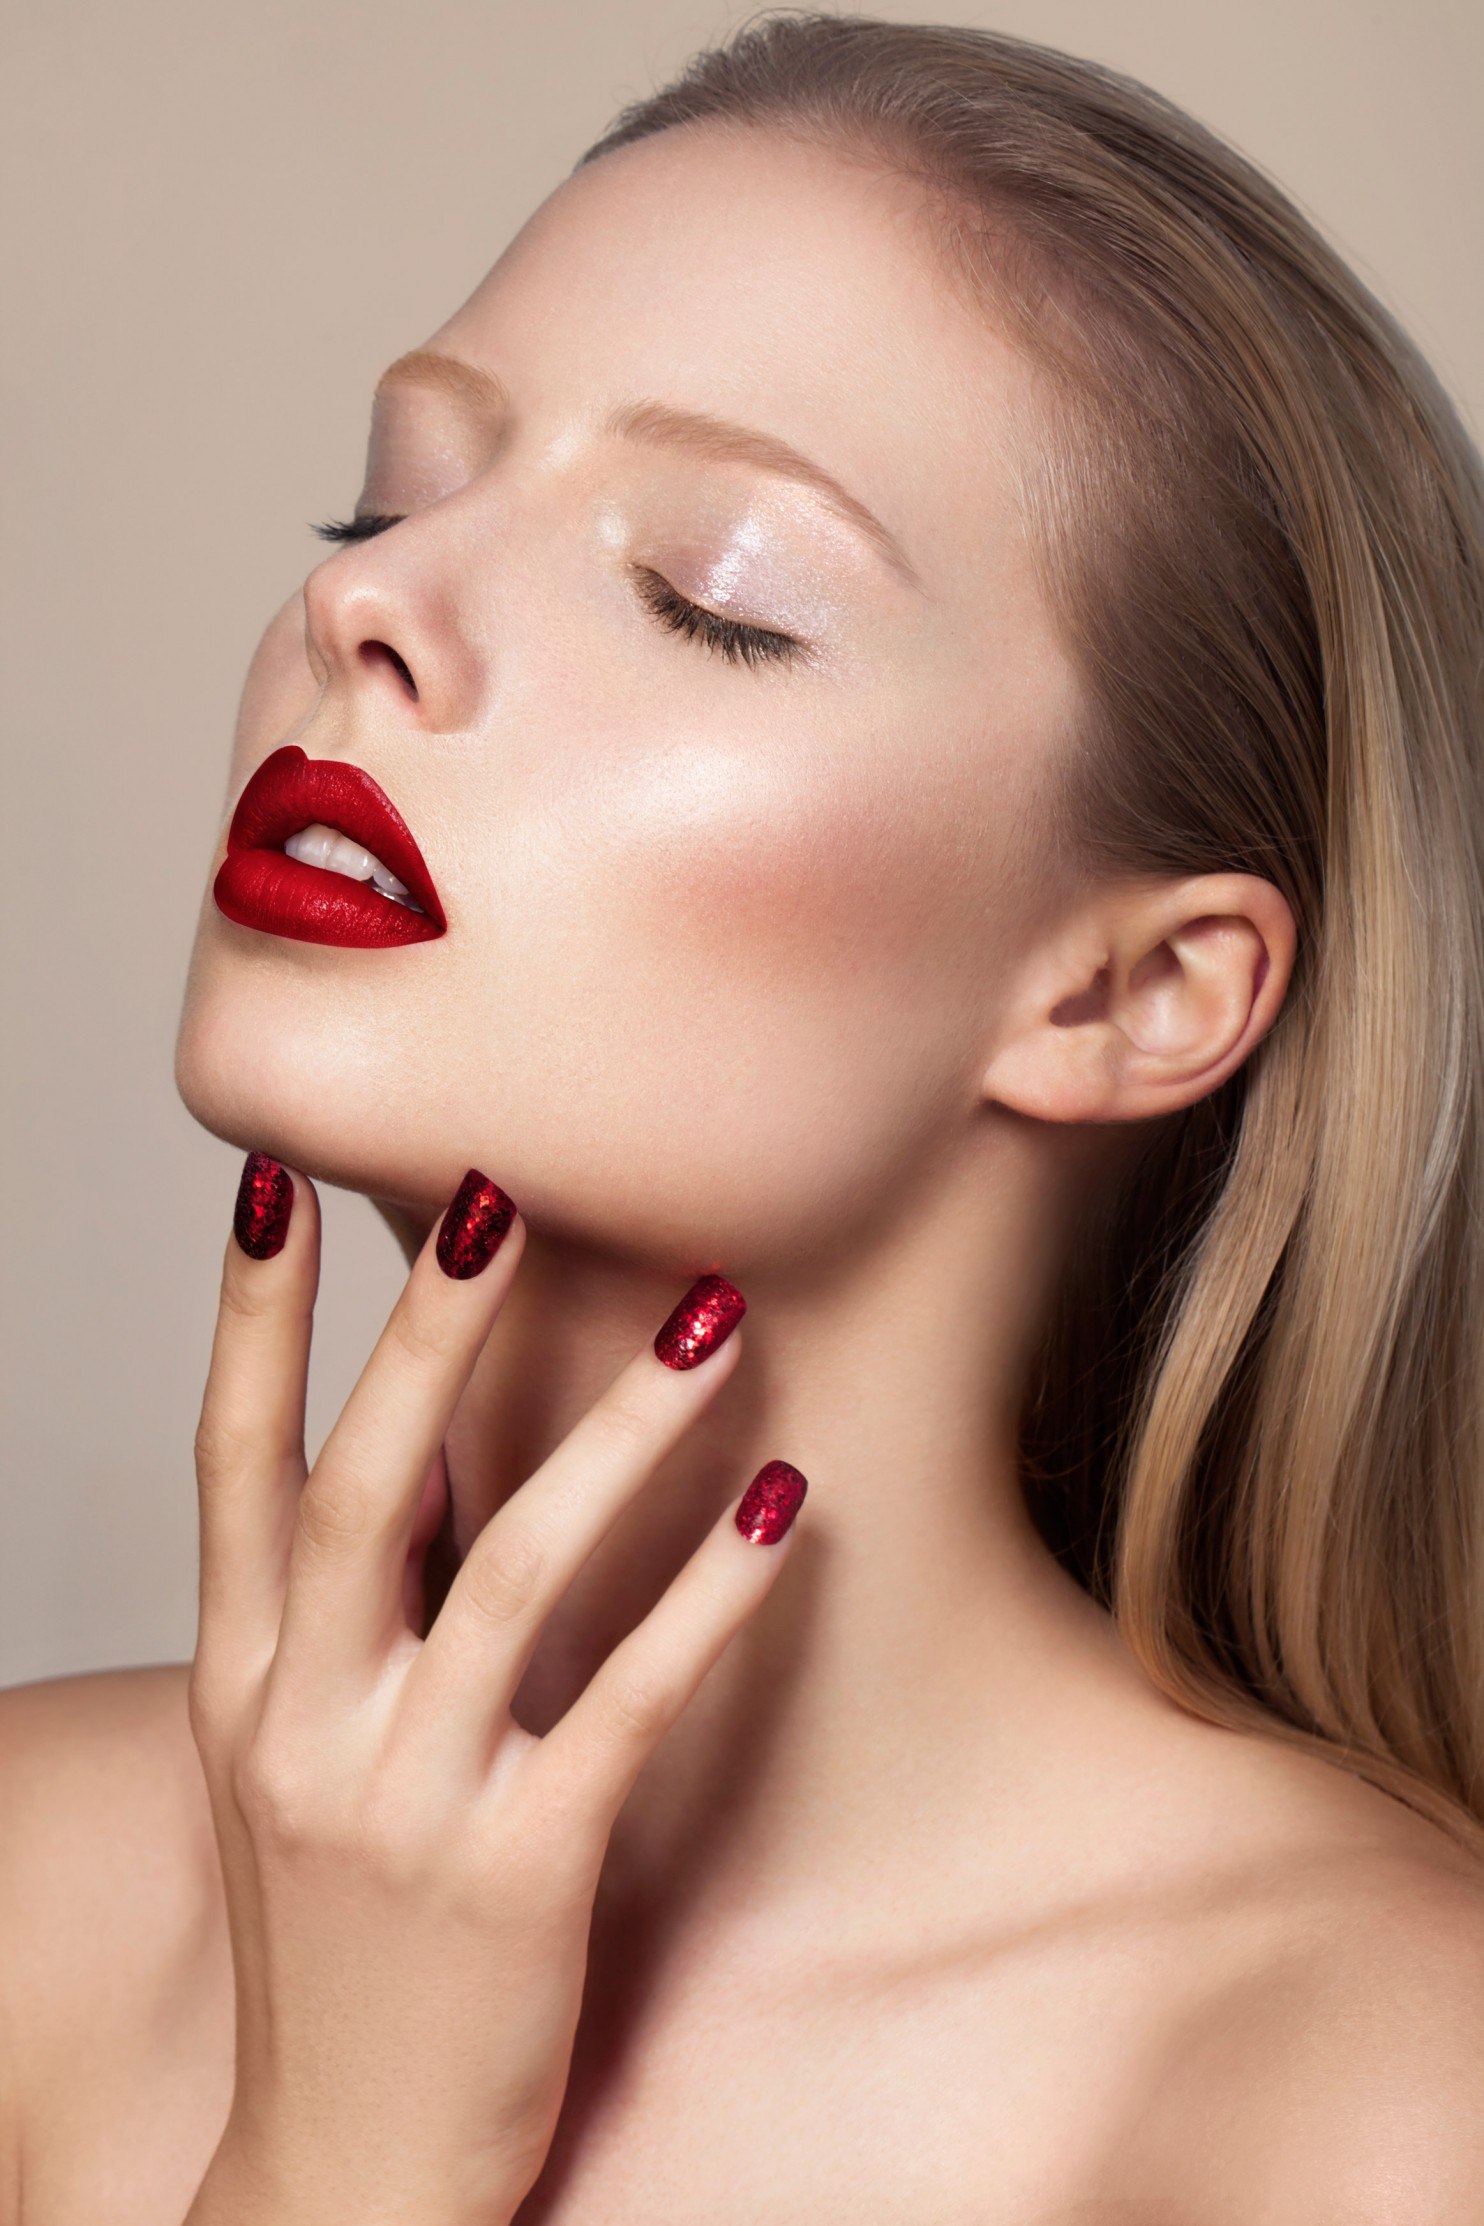 Capturing Beauty: The Impact of Professional Photography on LA's Cosmetic Industry 2